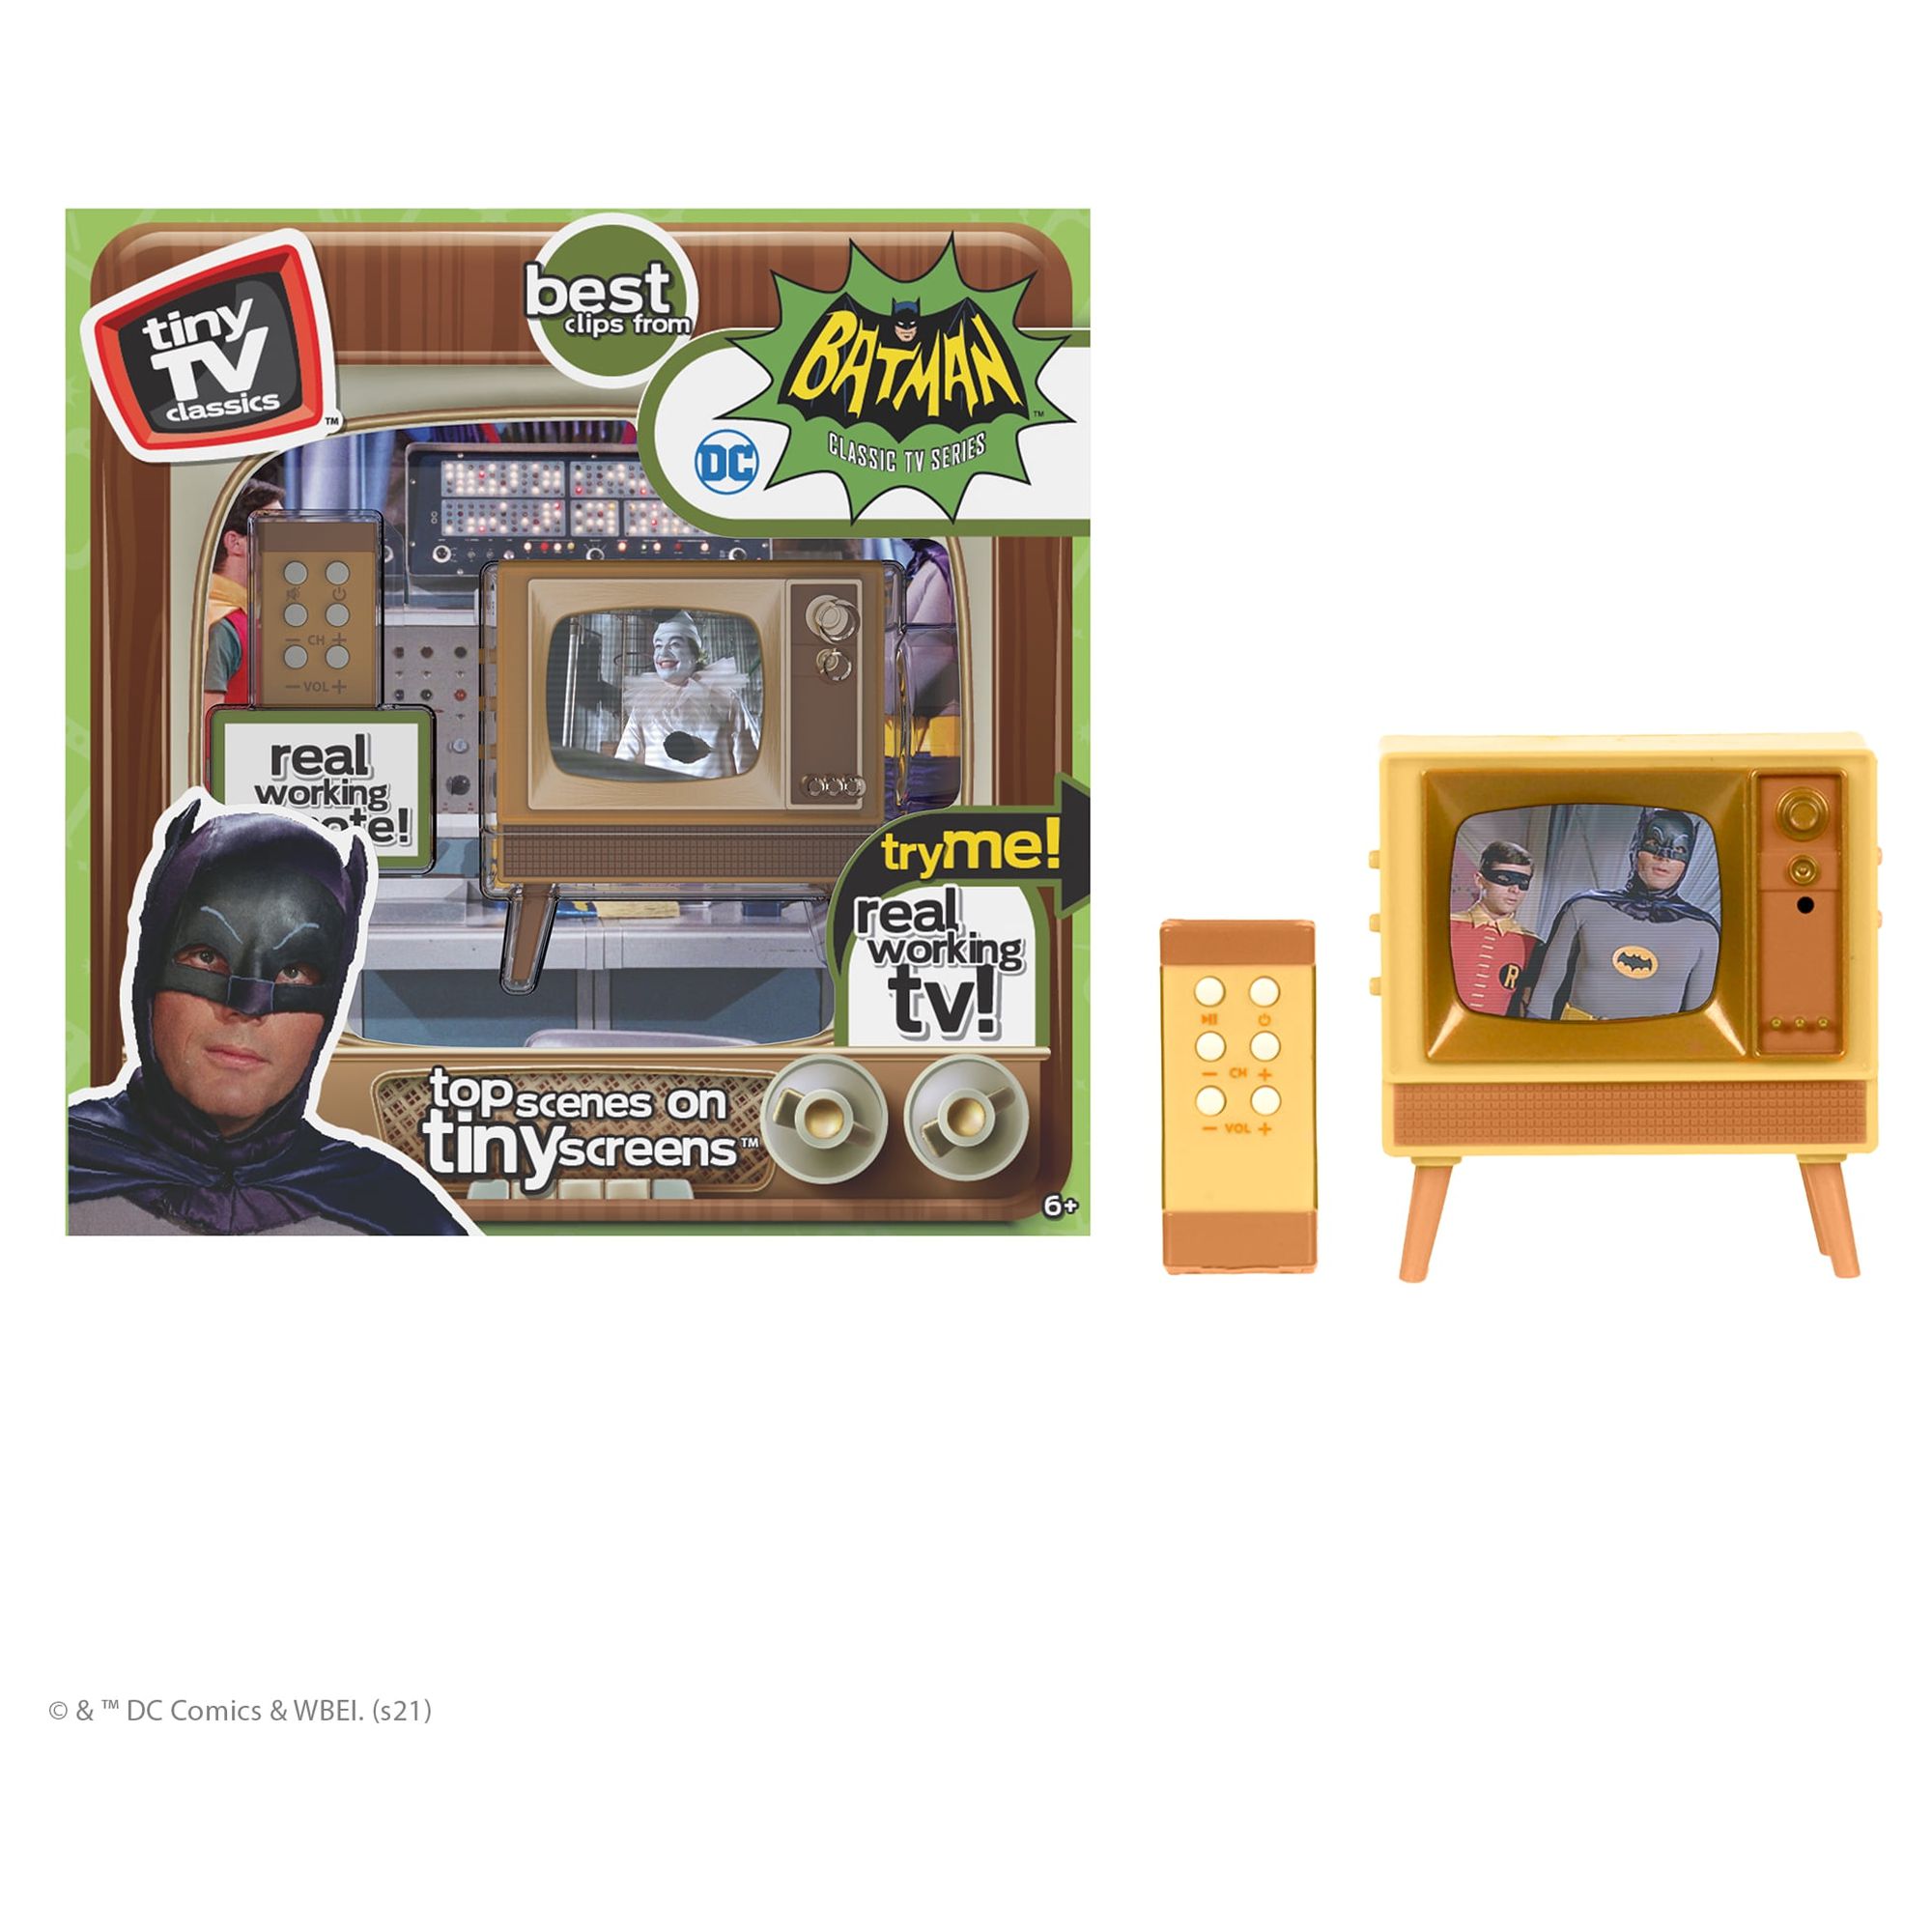 NEW FALL '21 - Tiny TV Classics - Batman Edition- Newest Collectible from Basic Fun - Watch top Batman scenes on a real-working Tiny TV (with working remote)! - image 1 of 12